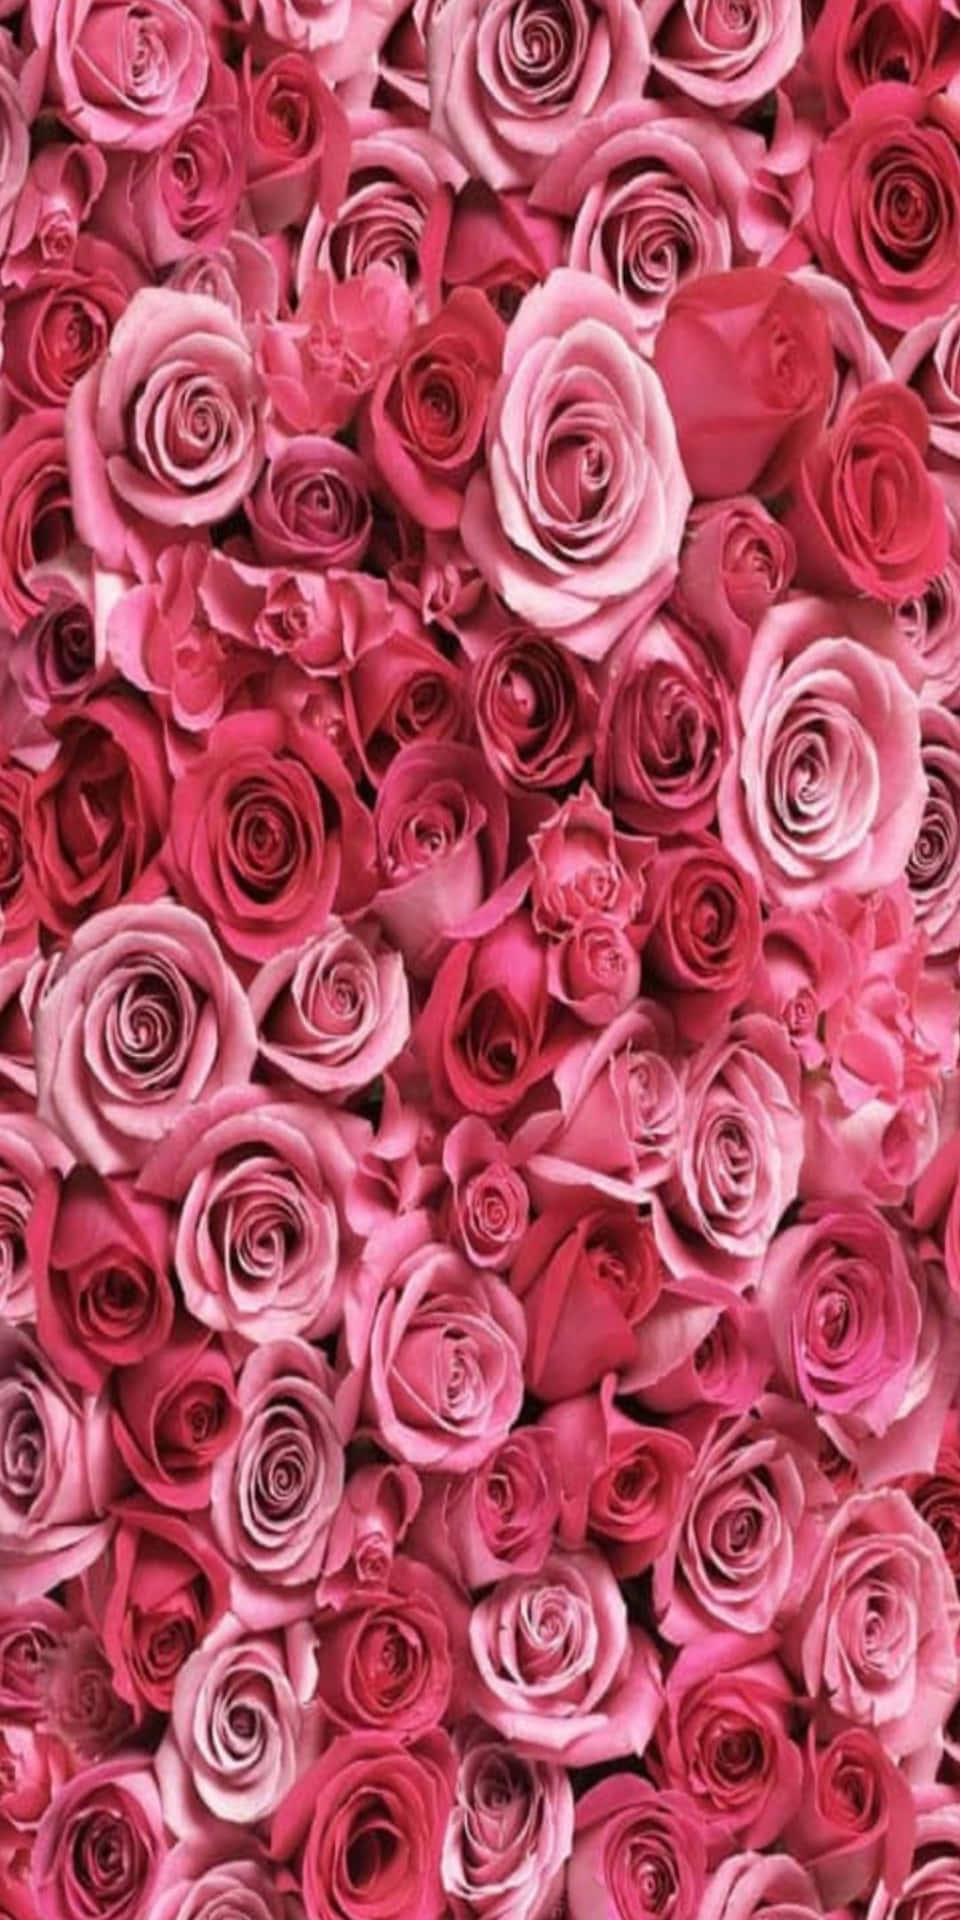 [100+] Pixel 3 Roses Backgrounds | Wallpapers.com